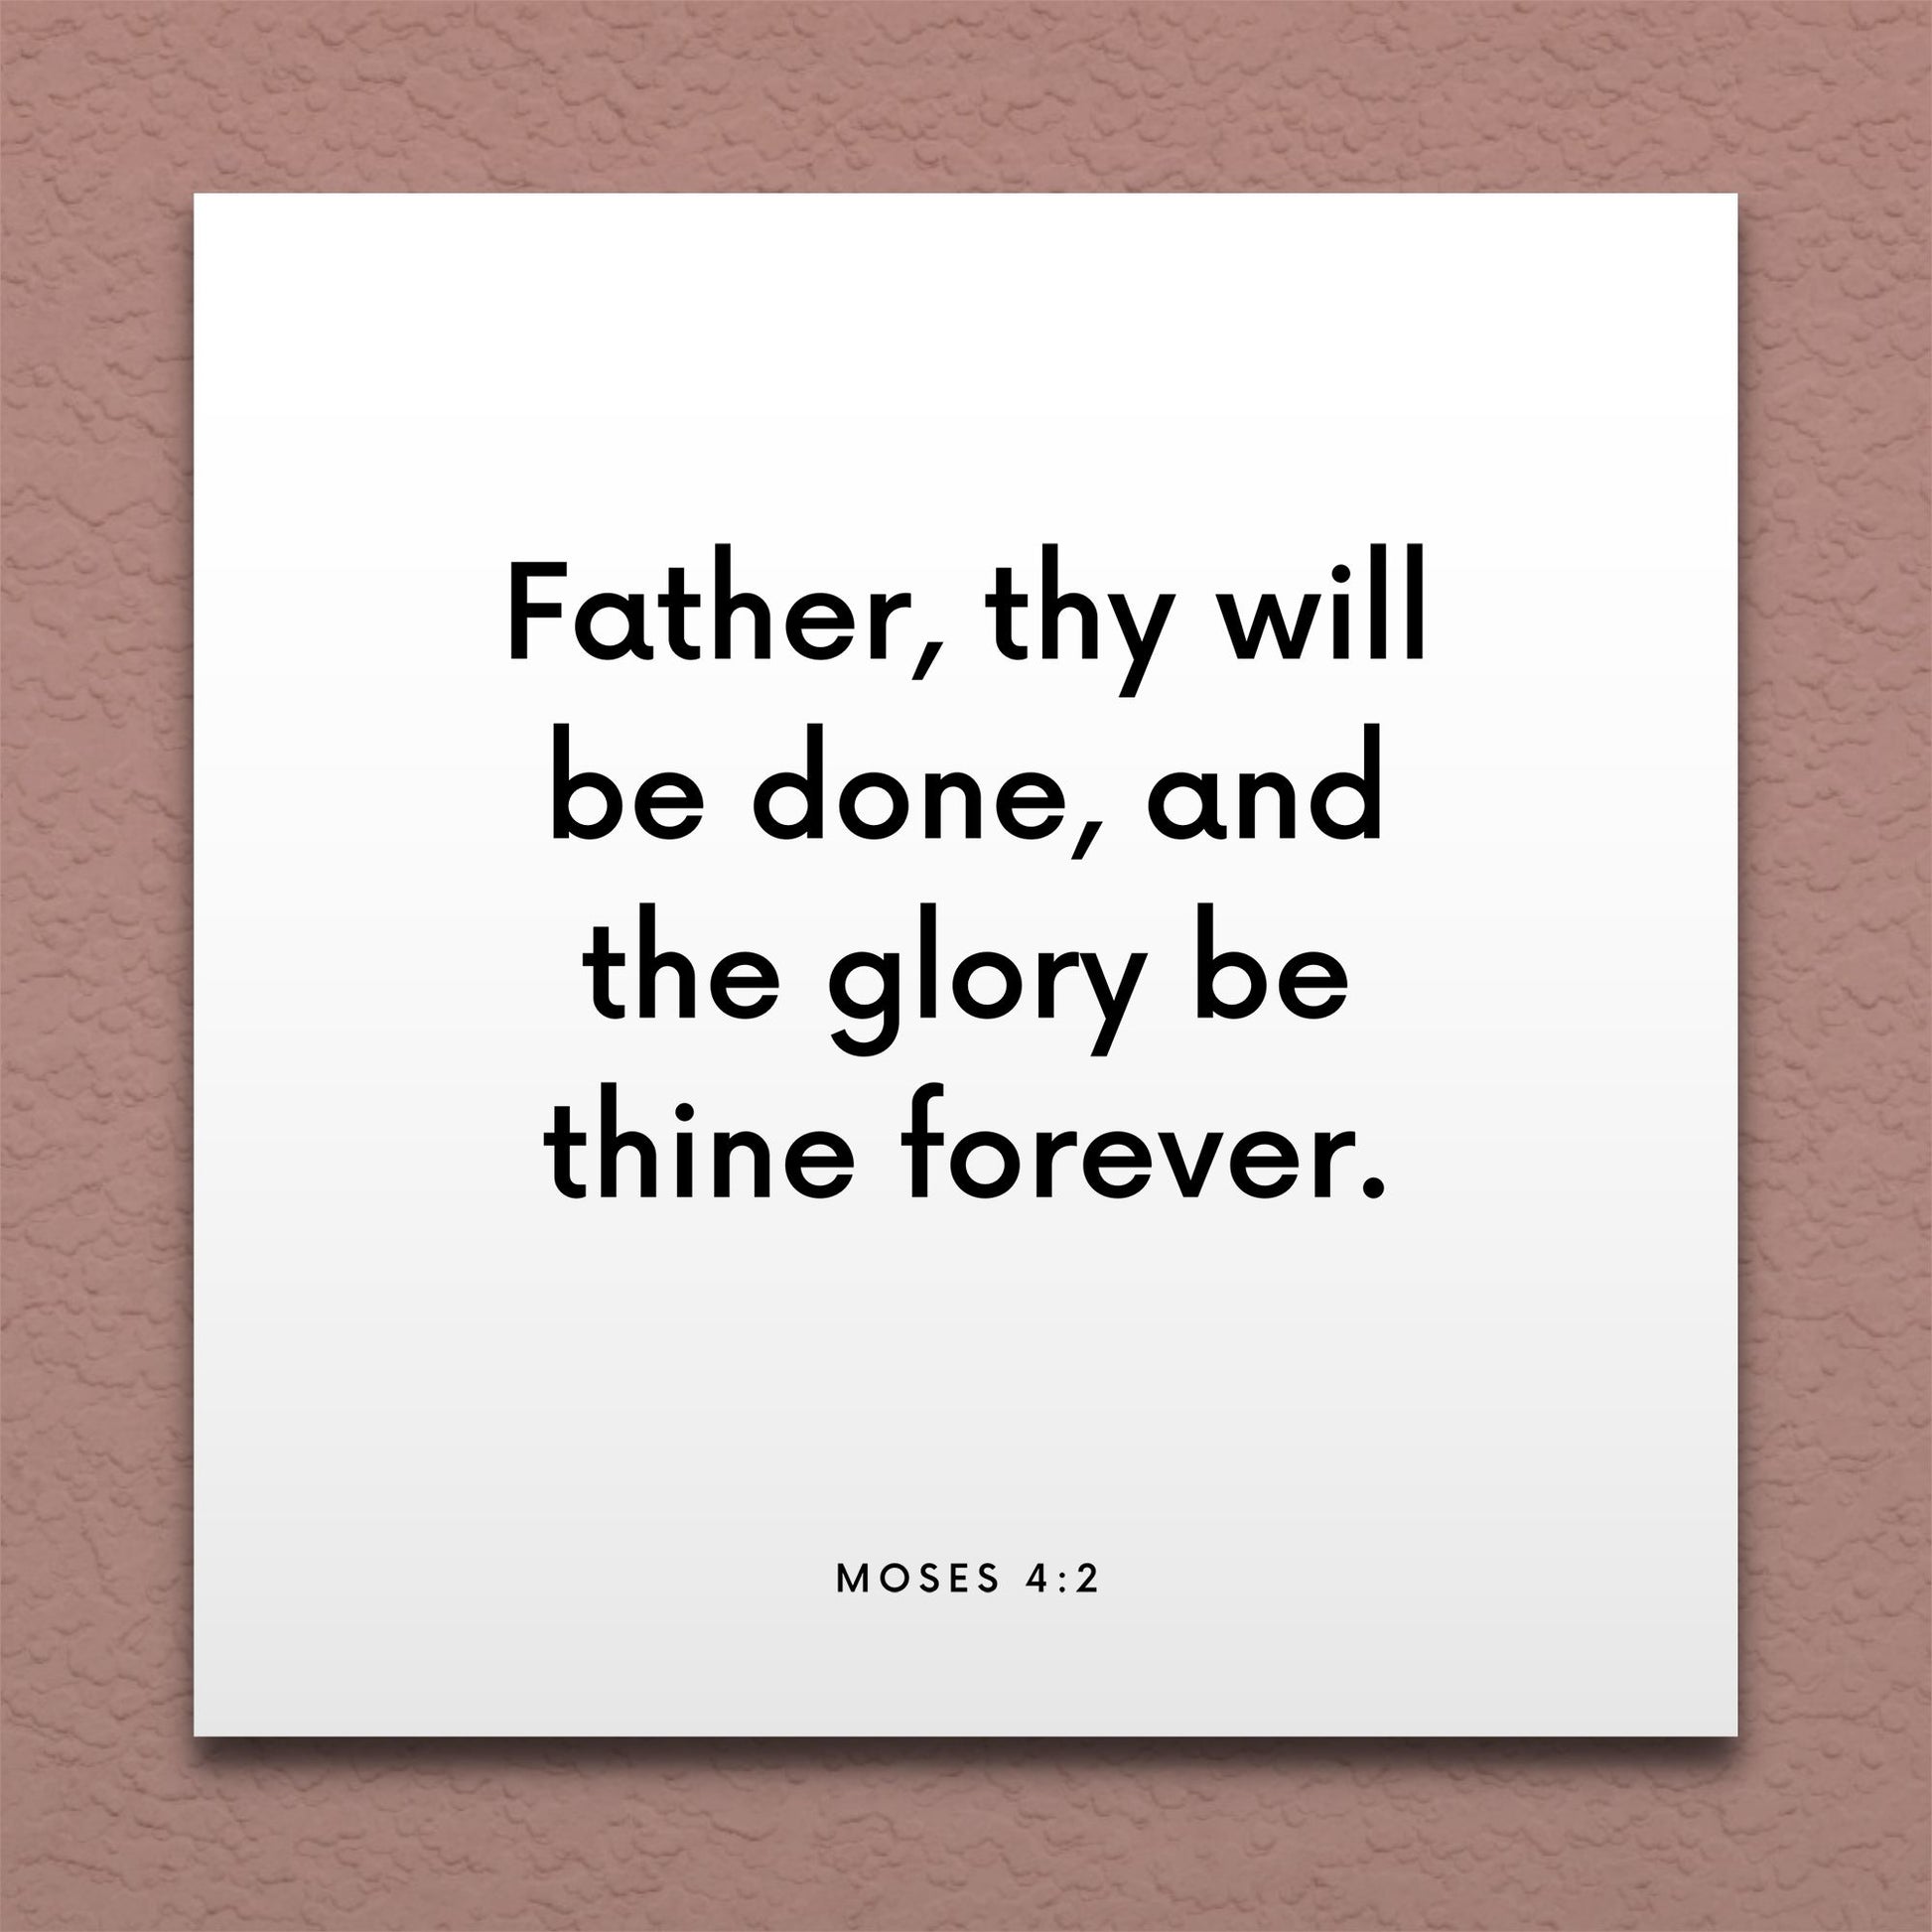 Wall-mounted scripture tile for Moses 4:2 - "Father, thy will be done, and the glory be thine forever"